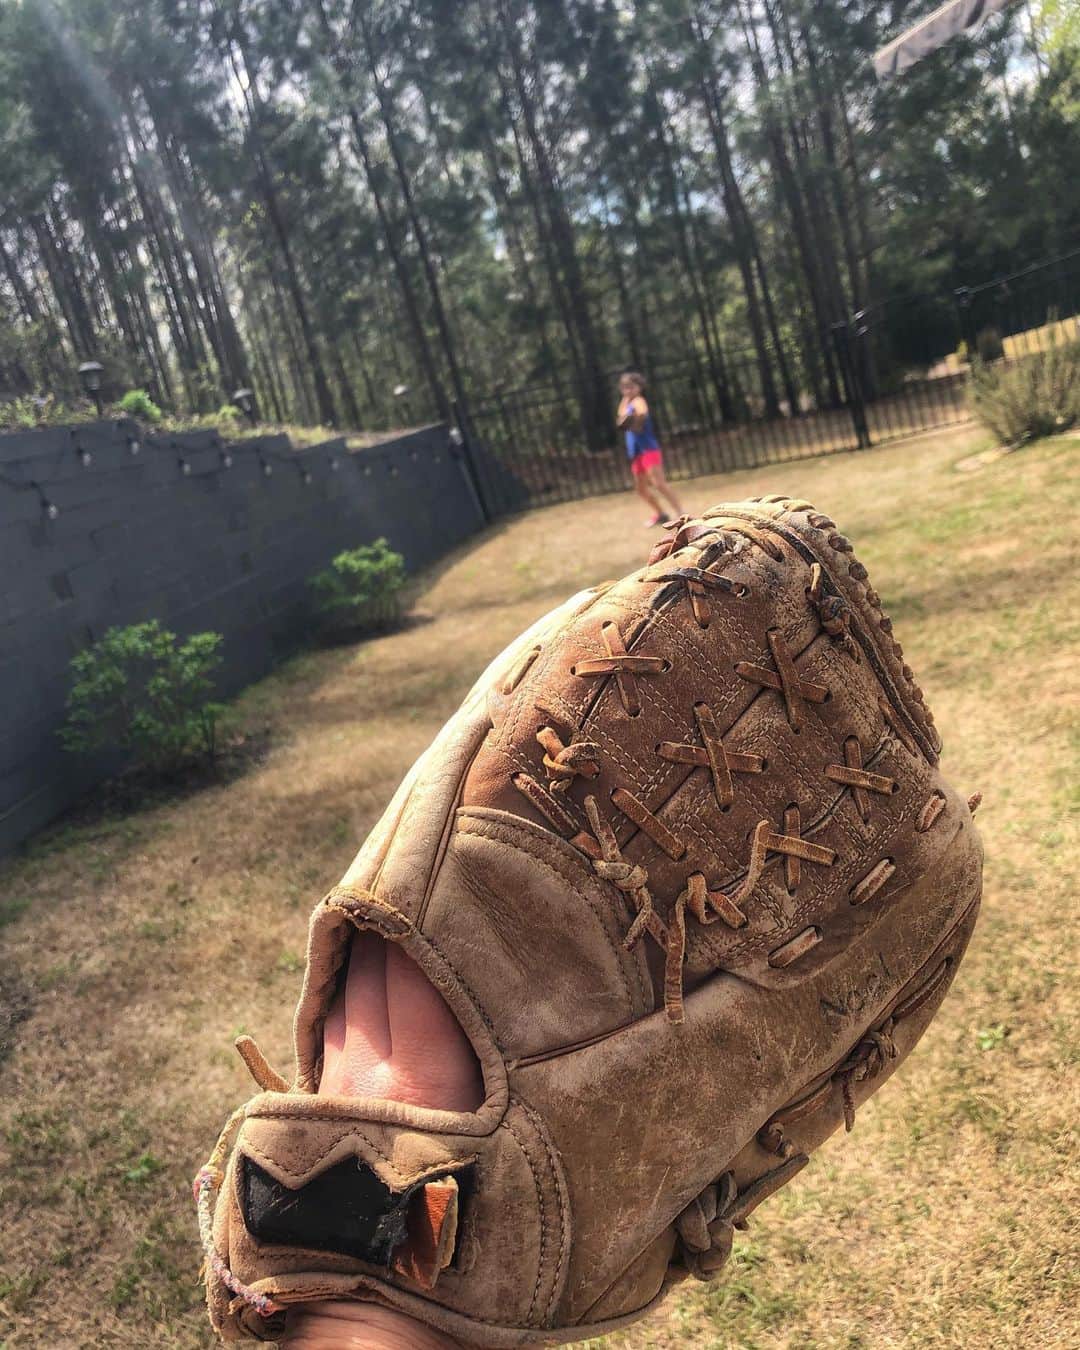 Angie Keiserのインスタグラム：「This was my Dad’s glove when he played ball. And then he passed it on to me and I used it forever. And then the baseball/softball gene skipped a generation and we fully embraced Sydney’s love of tennis. She’s missing tennis hard. But last week she asked if we’d teach her to catch with a glove. So this is me, with my Dad’s glove, playing catch with my kid, using her Dad’s childhood glove. I’m not sure this would’ve happened outside of a global pandemic, requiring us to stay home, but I’ll take it. #stayhomesavelives」